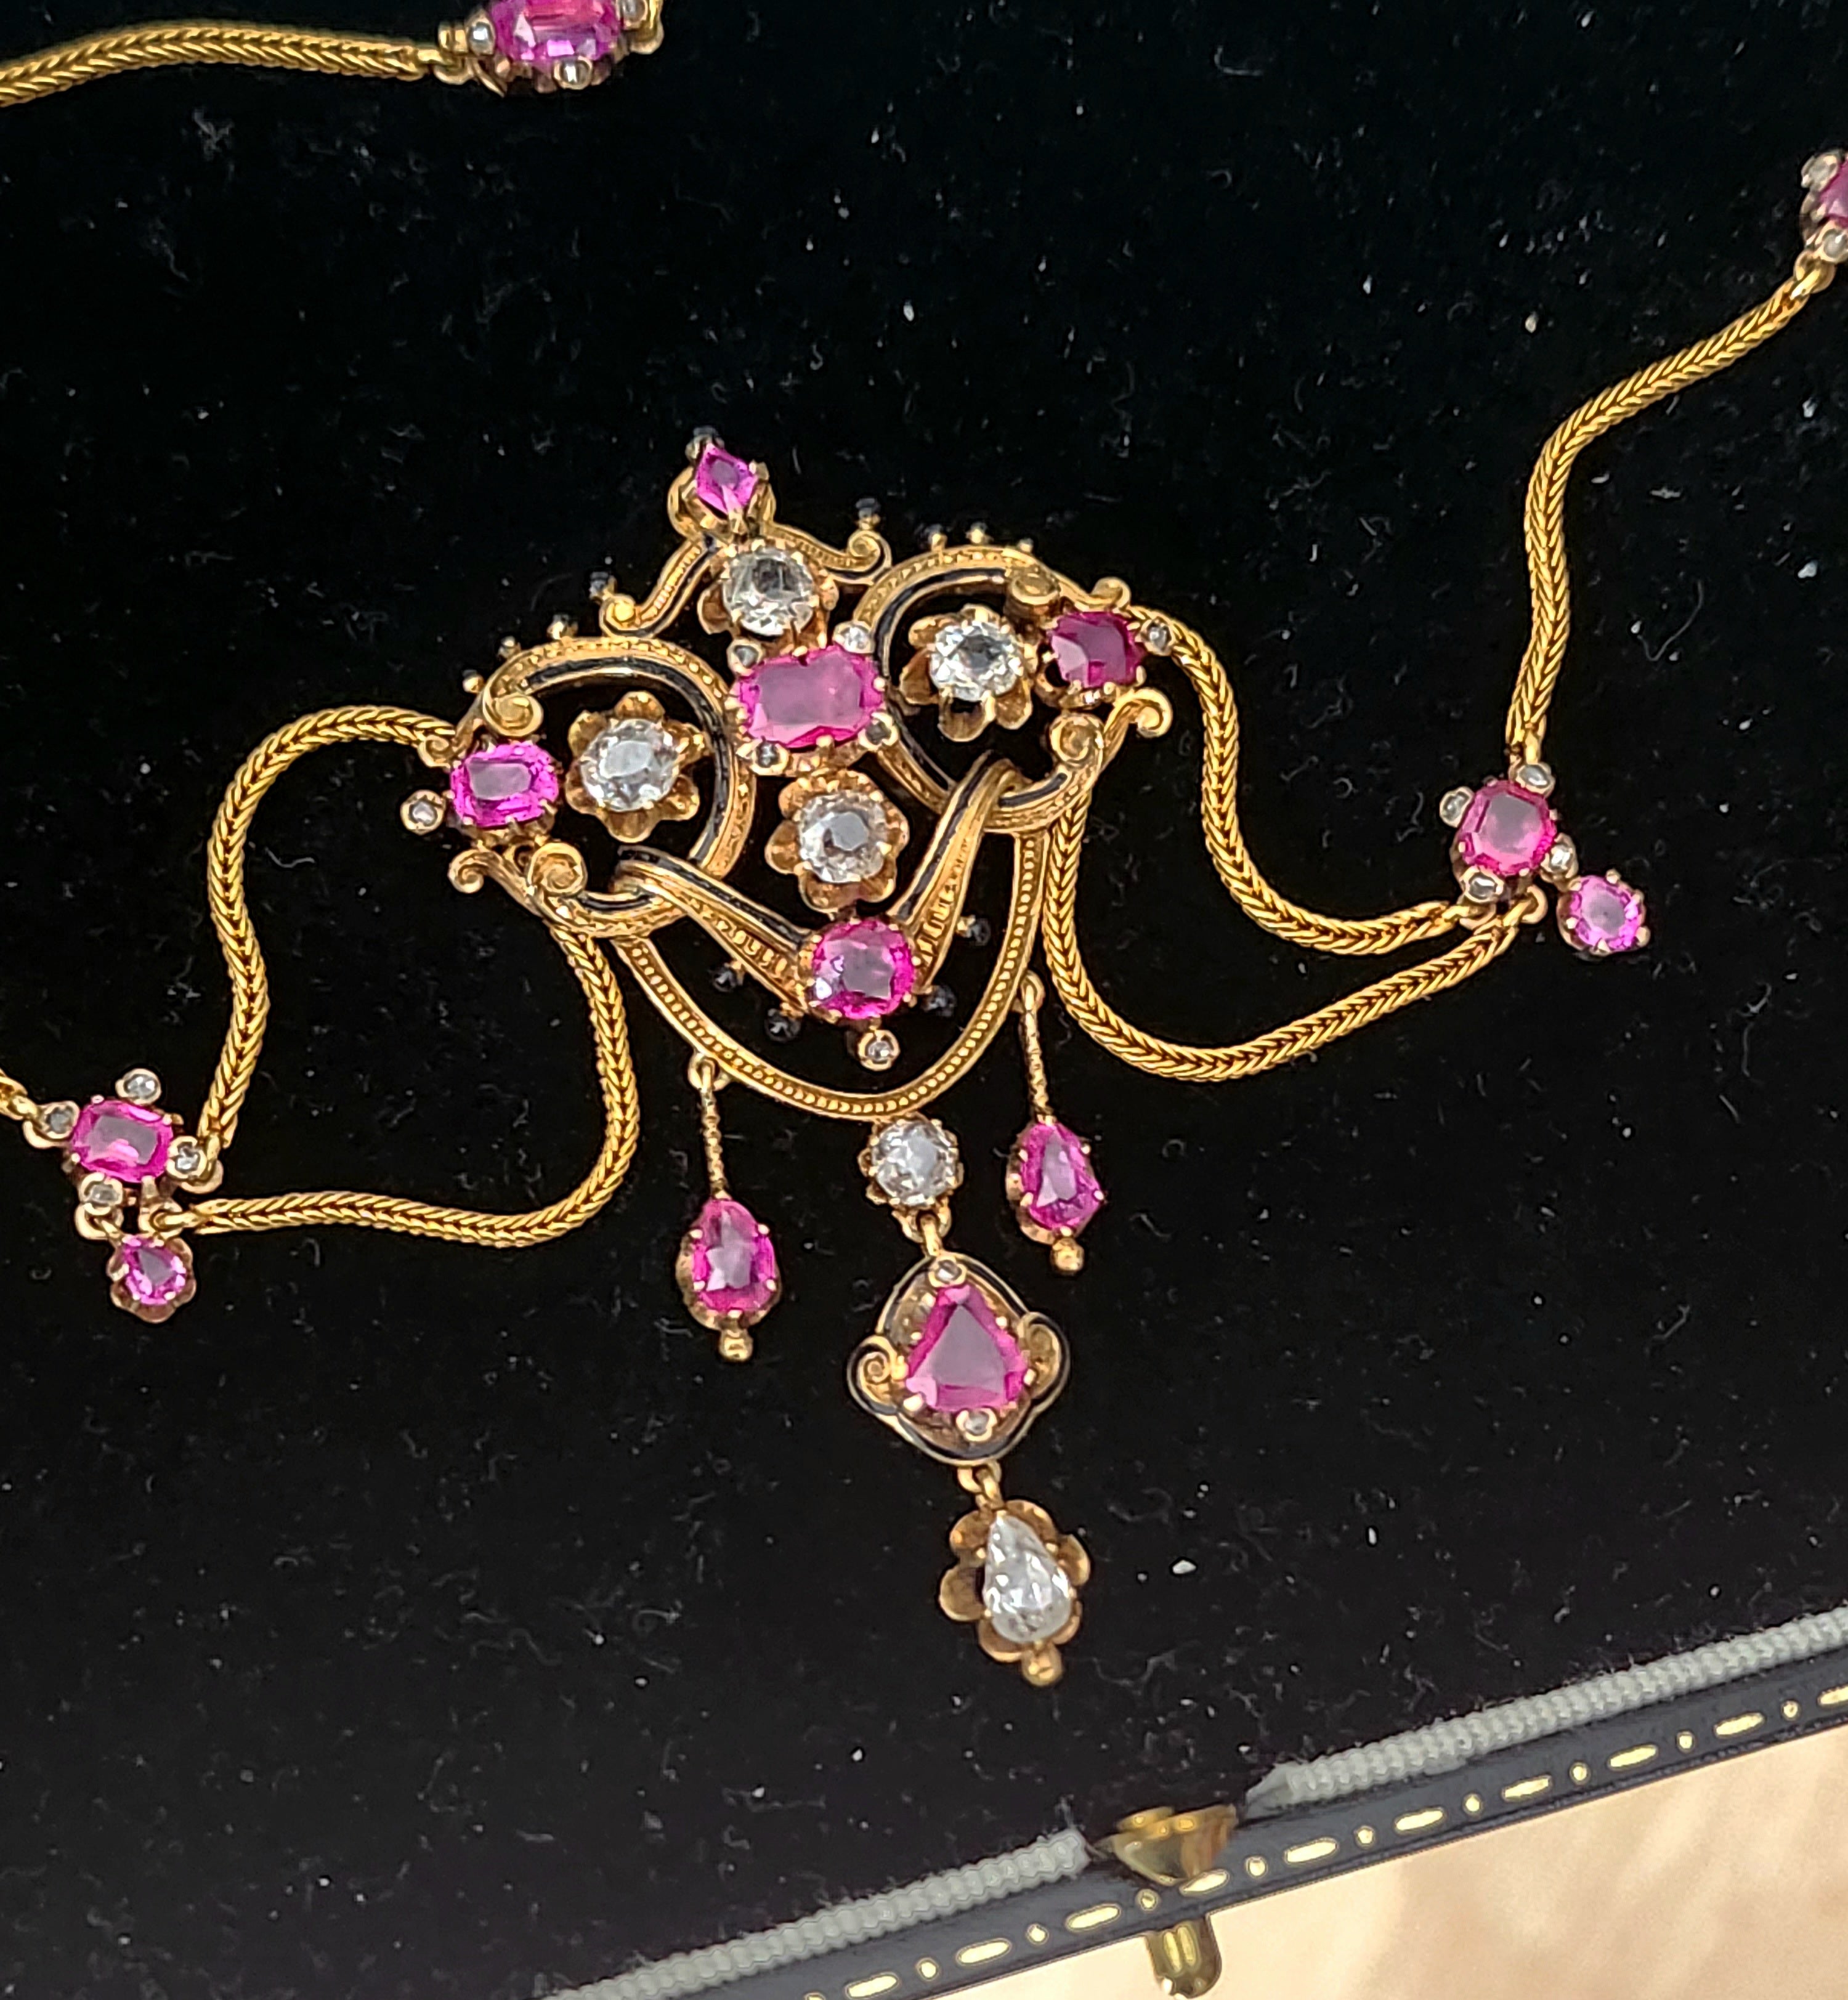 Antique 19th century art nouveau necklace in 18k gold with an estimate natural rubies of 6 carats and old mine cut diamonds 3.5 carats white color no inclousions decorted with black enamel in excellent condition